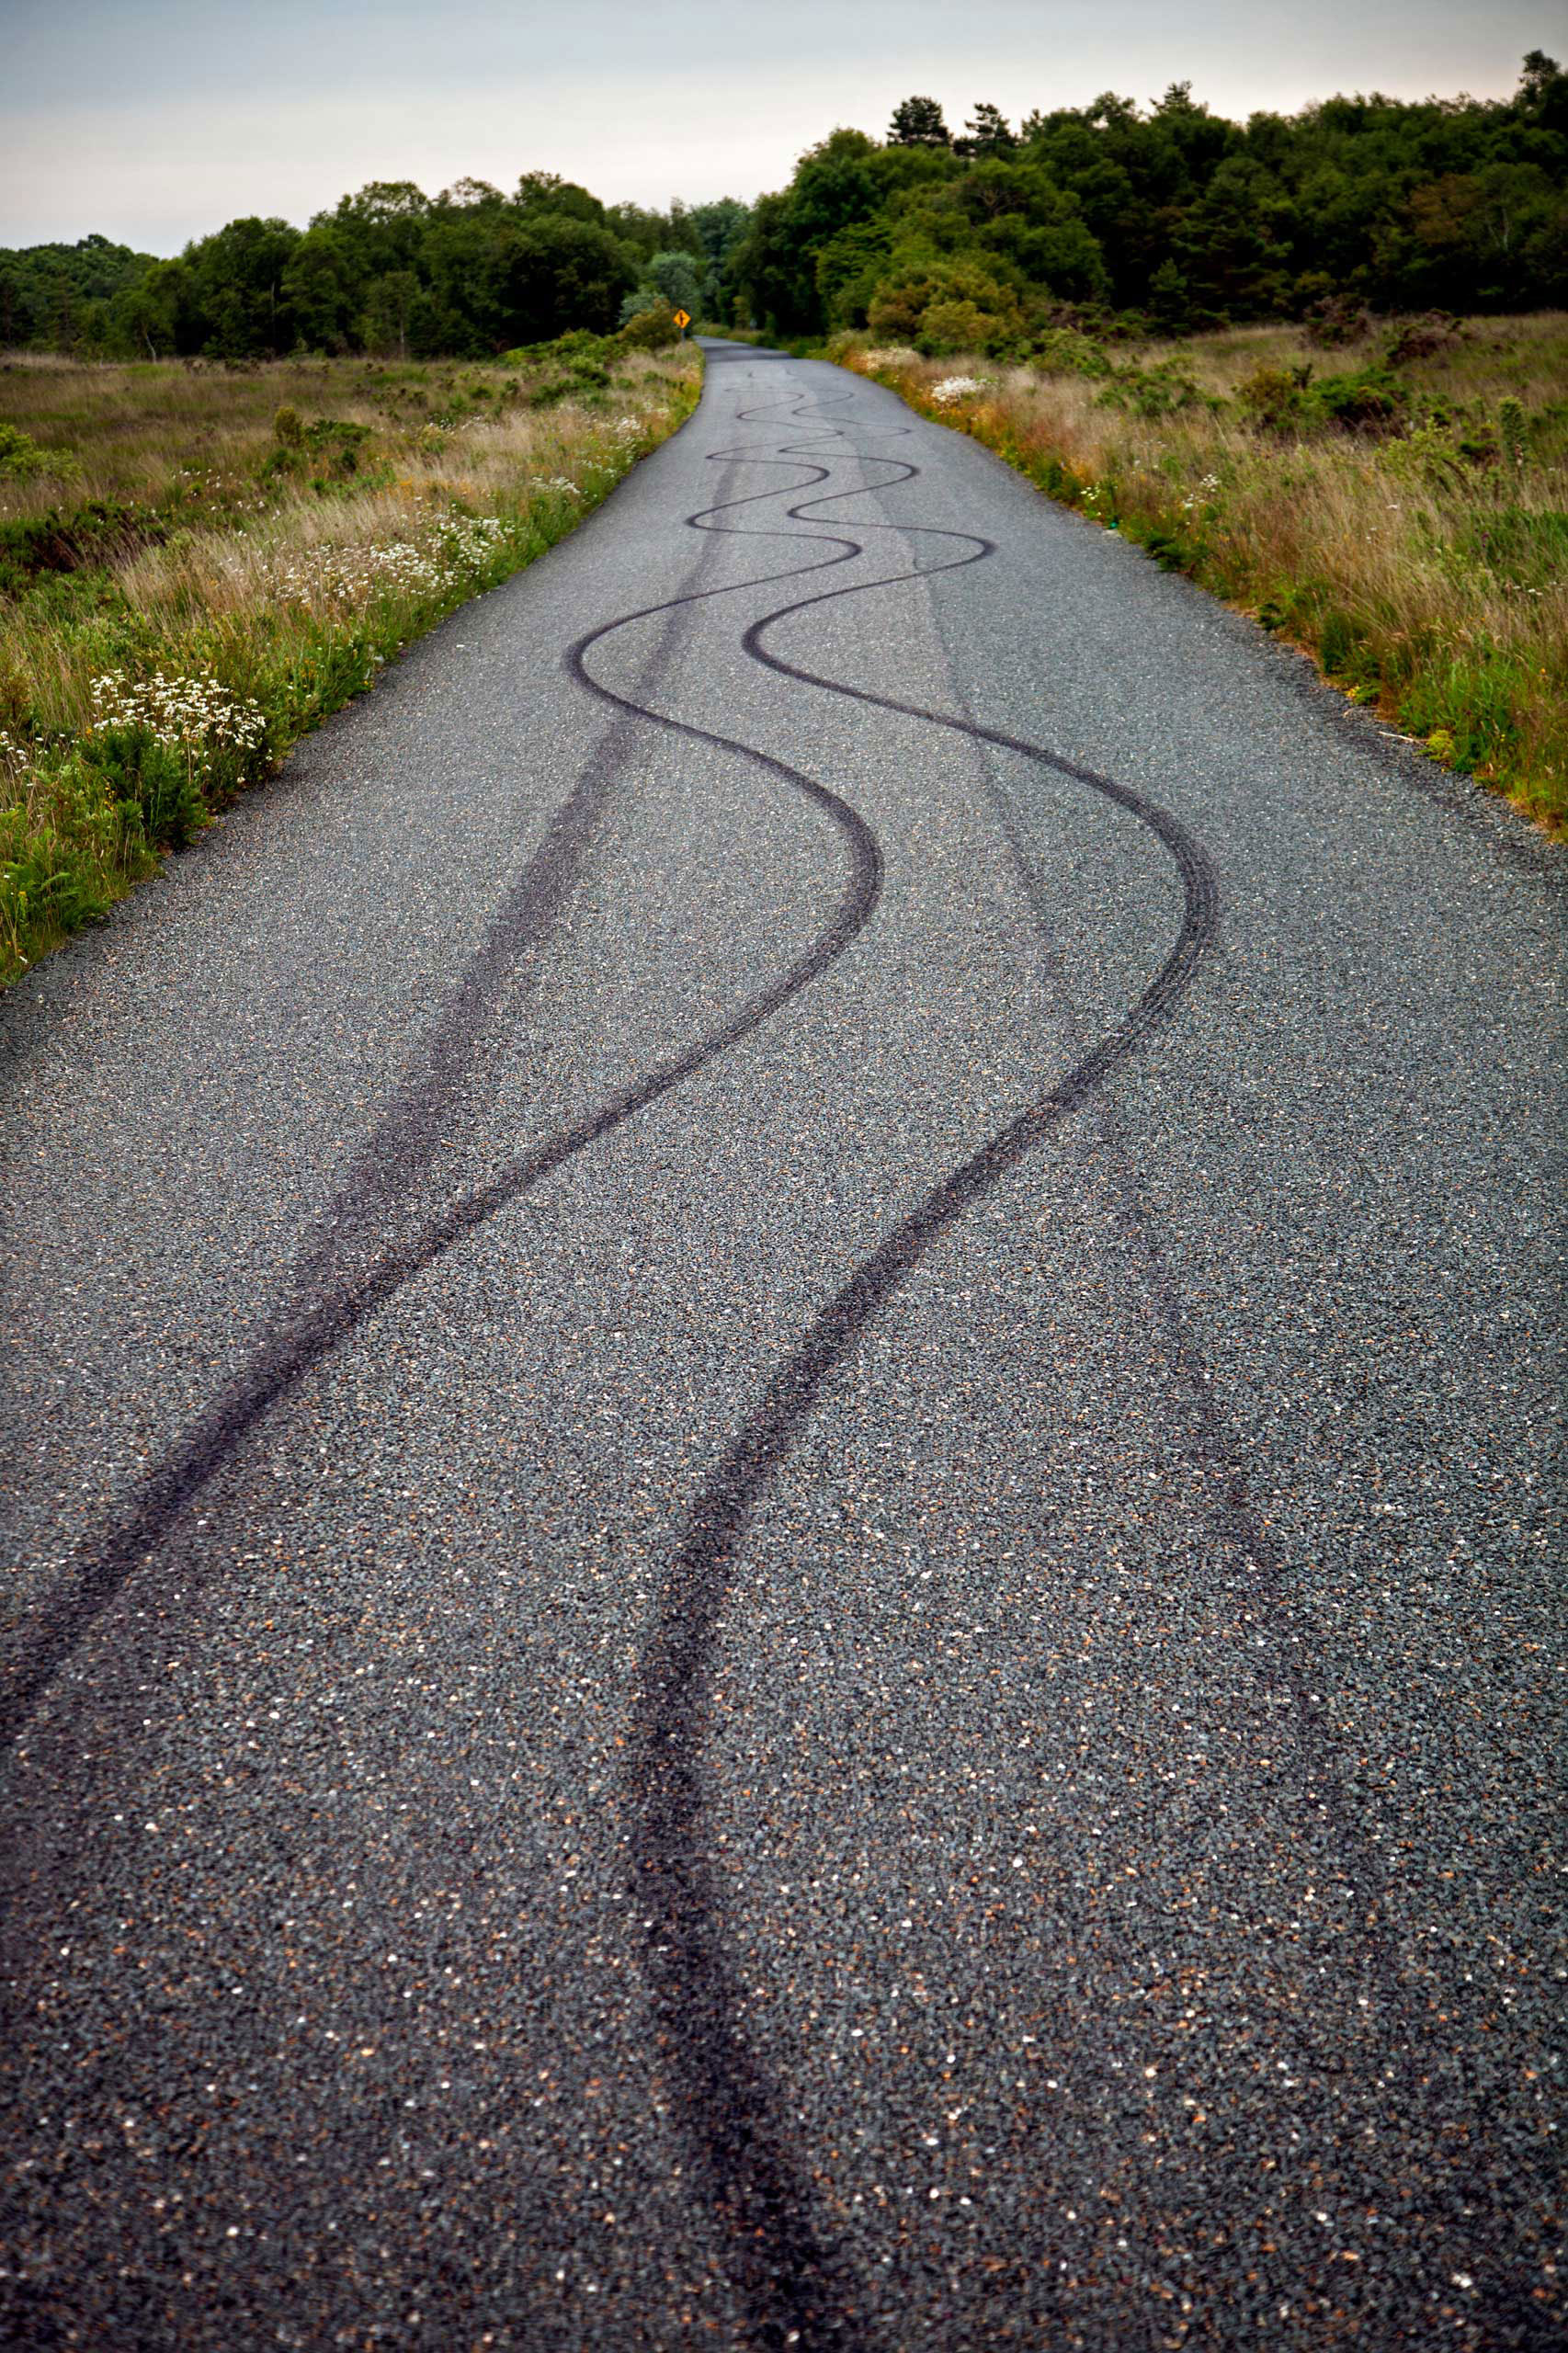 County Roscommon Tyre marks deliberately burned into the road by a joyrider.